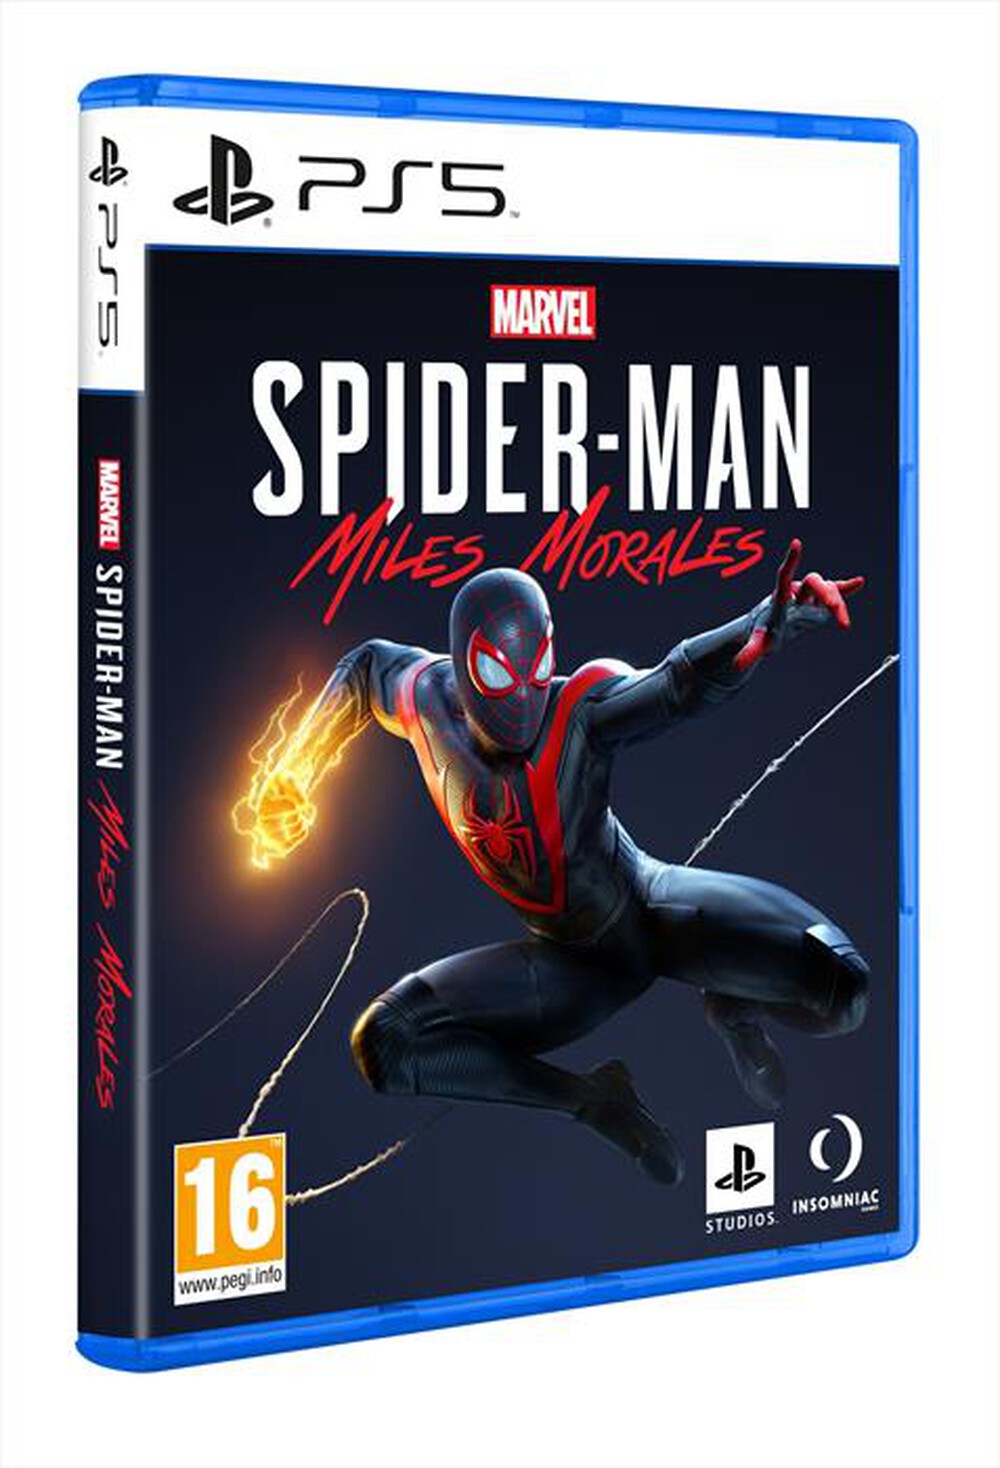 "SONY COMPUTER - MARVEL'S SPIDER-MAN MILES MORALES - PS5"